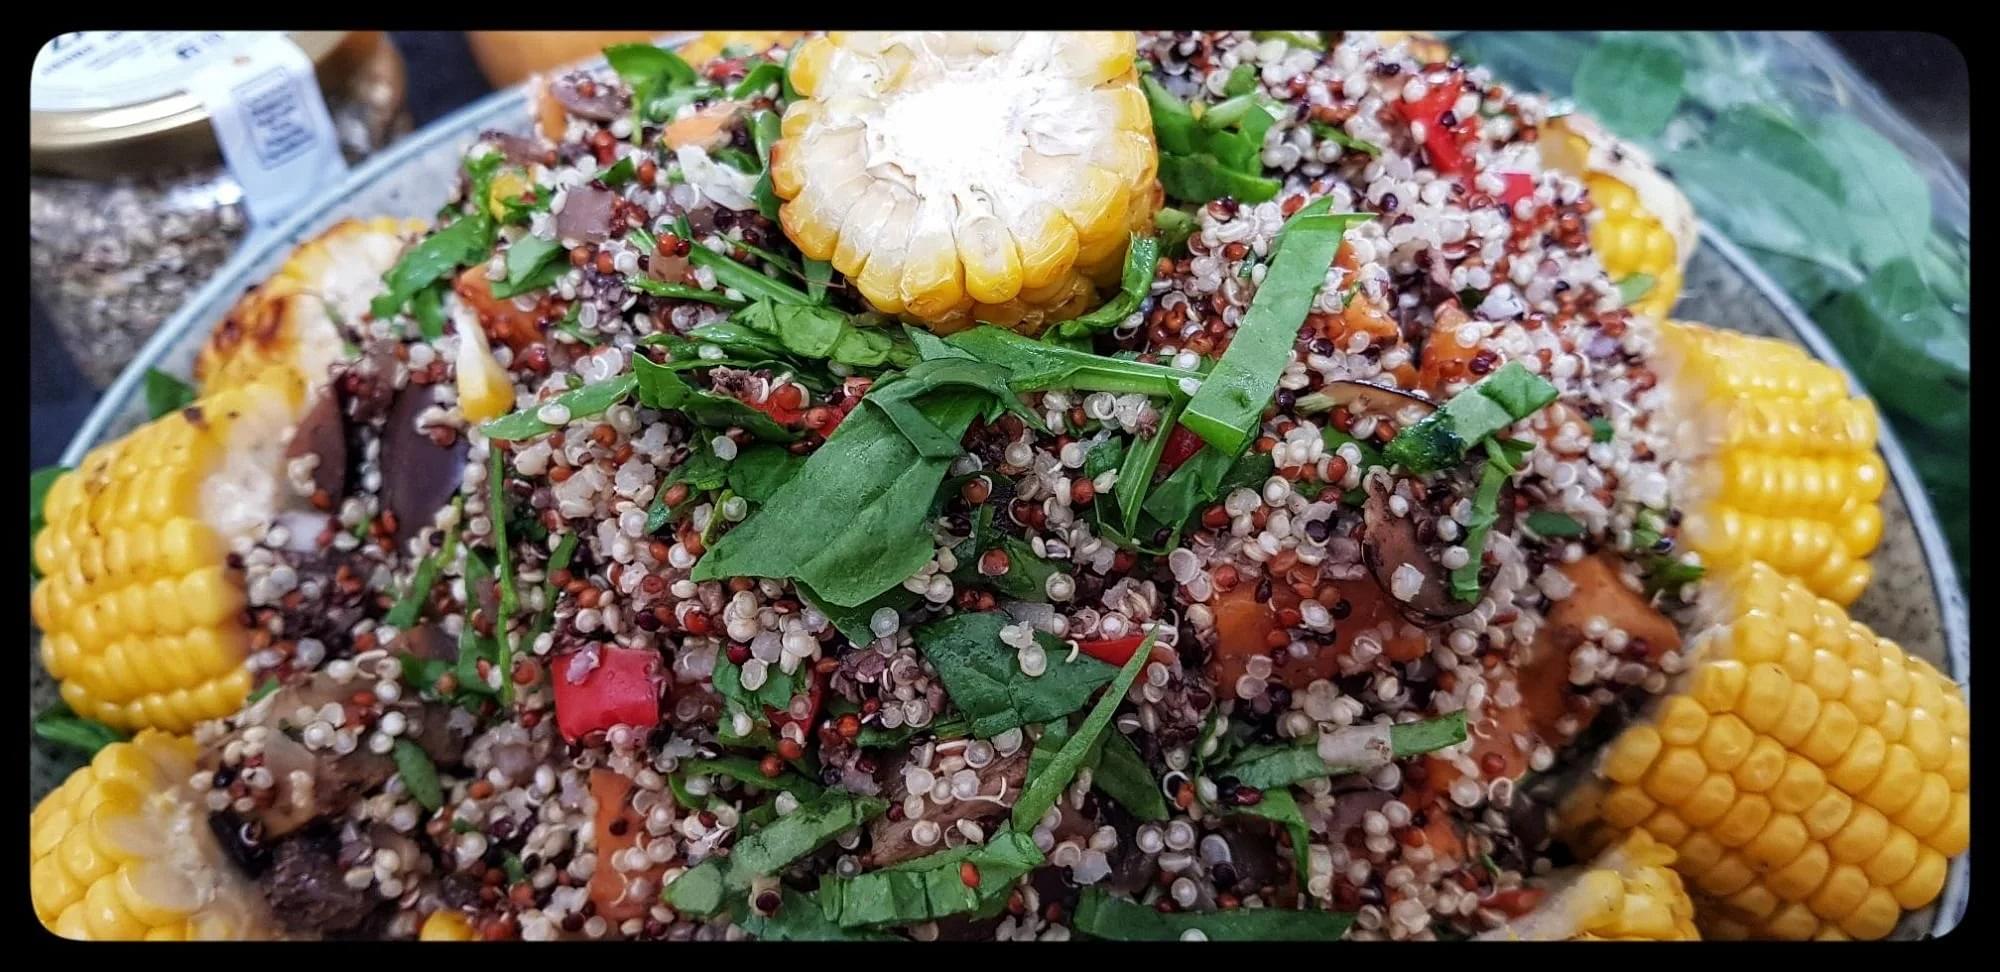 Roasted Vege Salad with Cous Cous